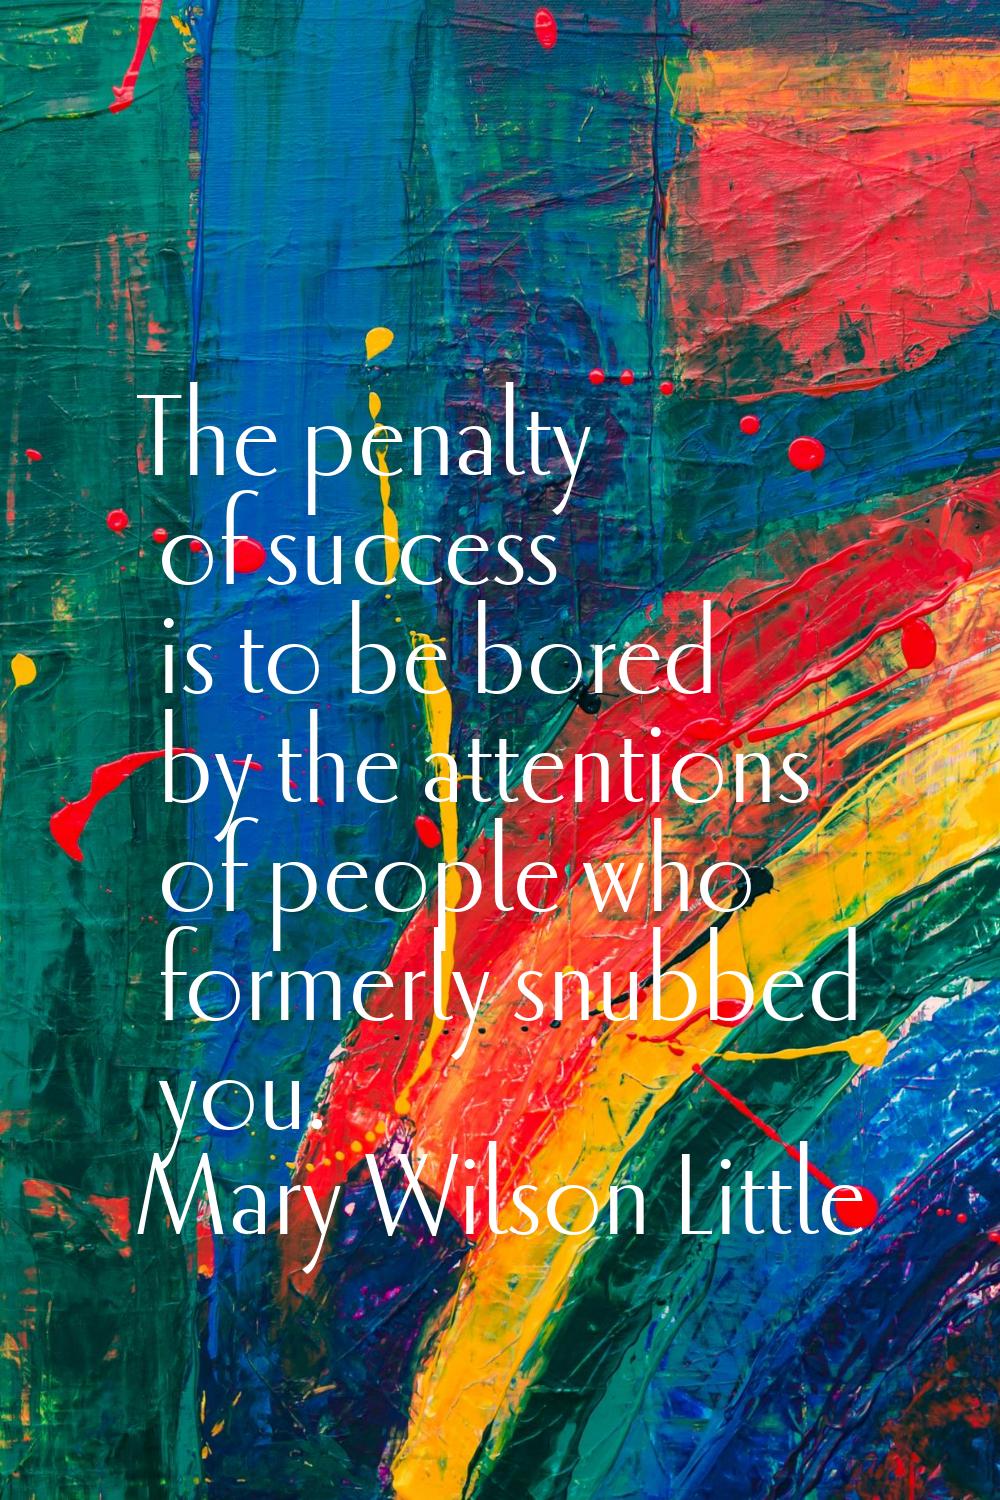 The penalty of success is to be bored by the attentions of people who formerly snubbed you.